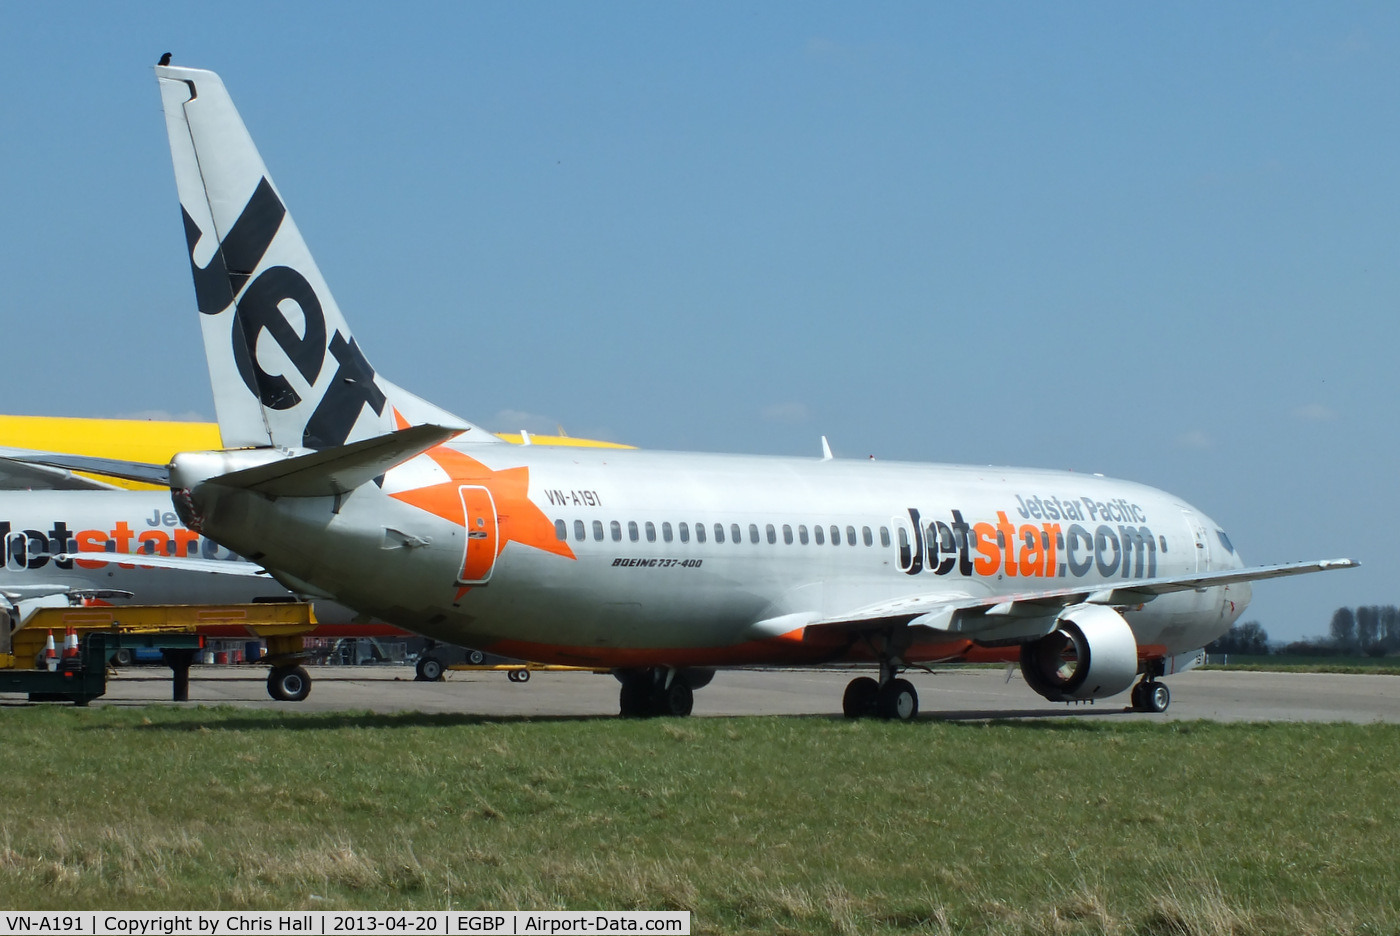 VN-A191, 1994 Boeing 737-4H6 C/N 27306, ex Jetstar Pacific Airlines B737 due to be scrapped bt ASI at Kemble